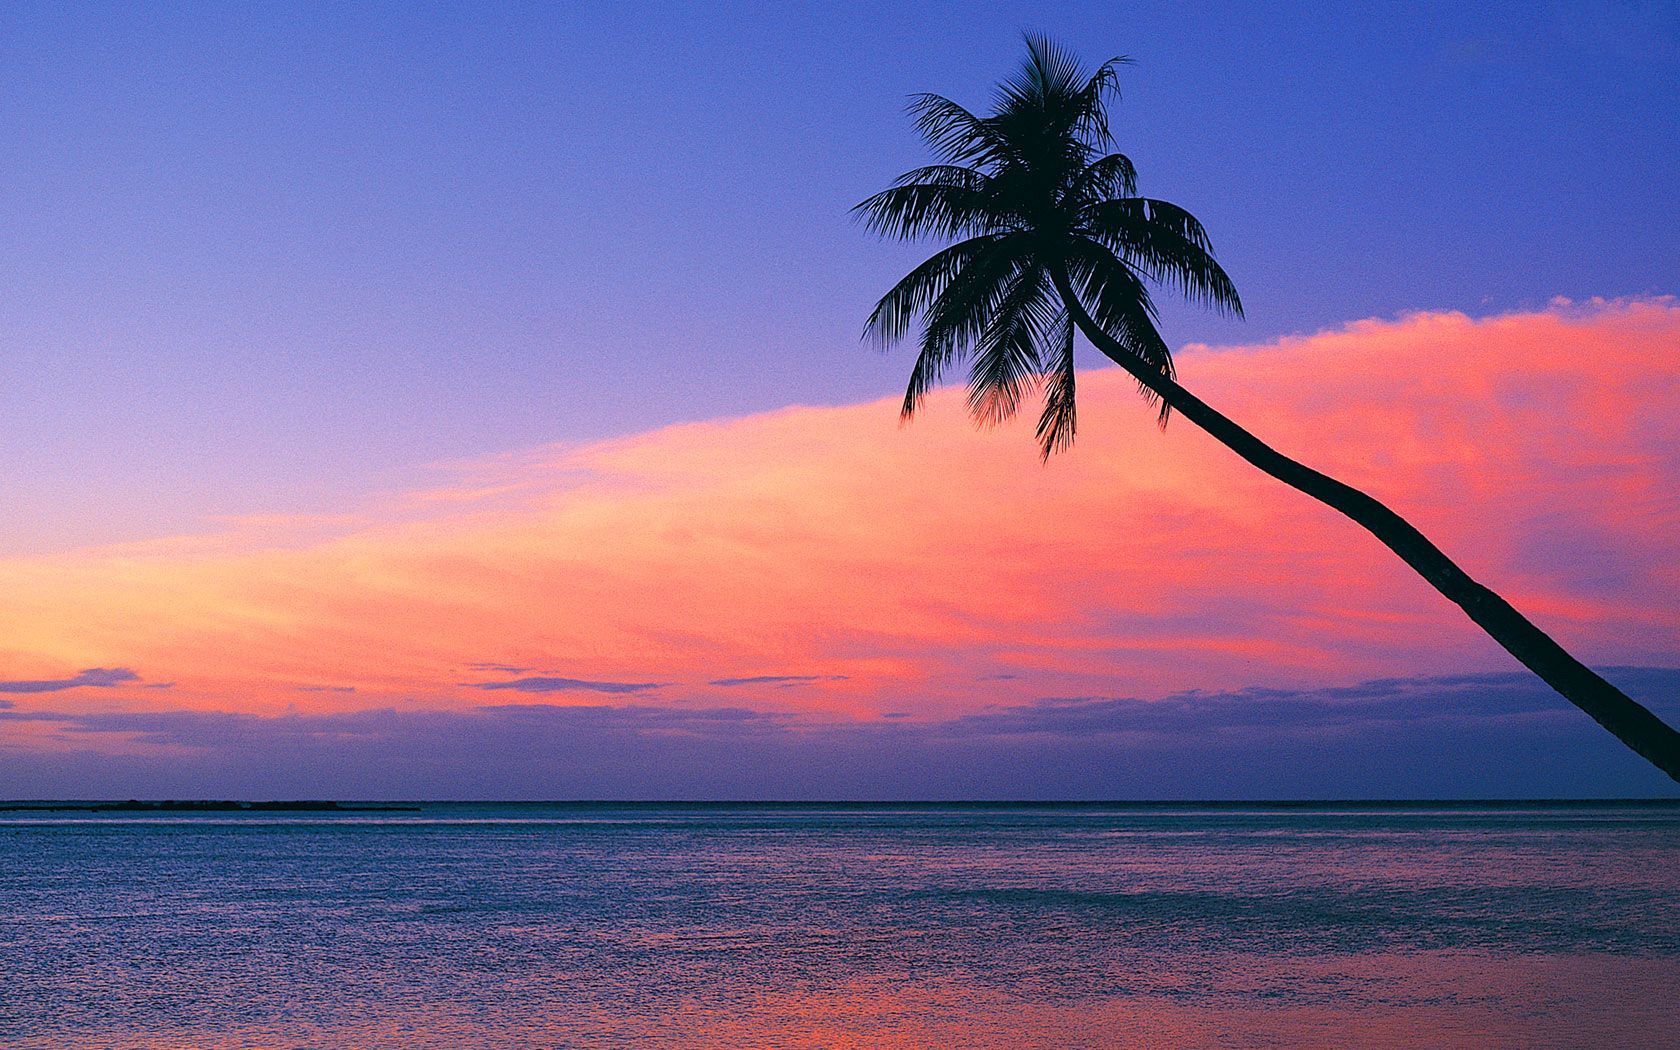 Look at the pink sunset from the beach wallpaper